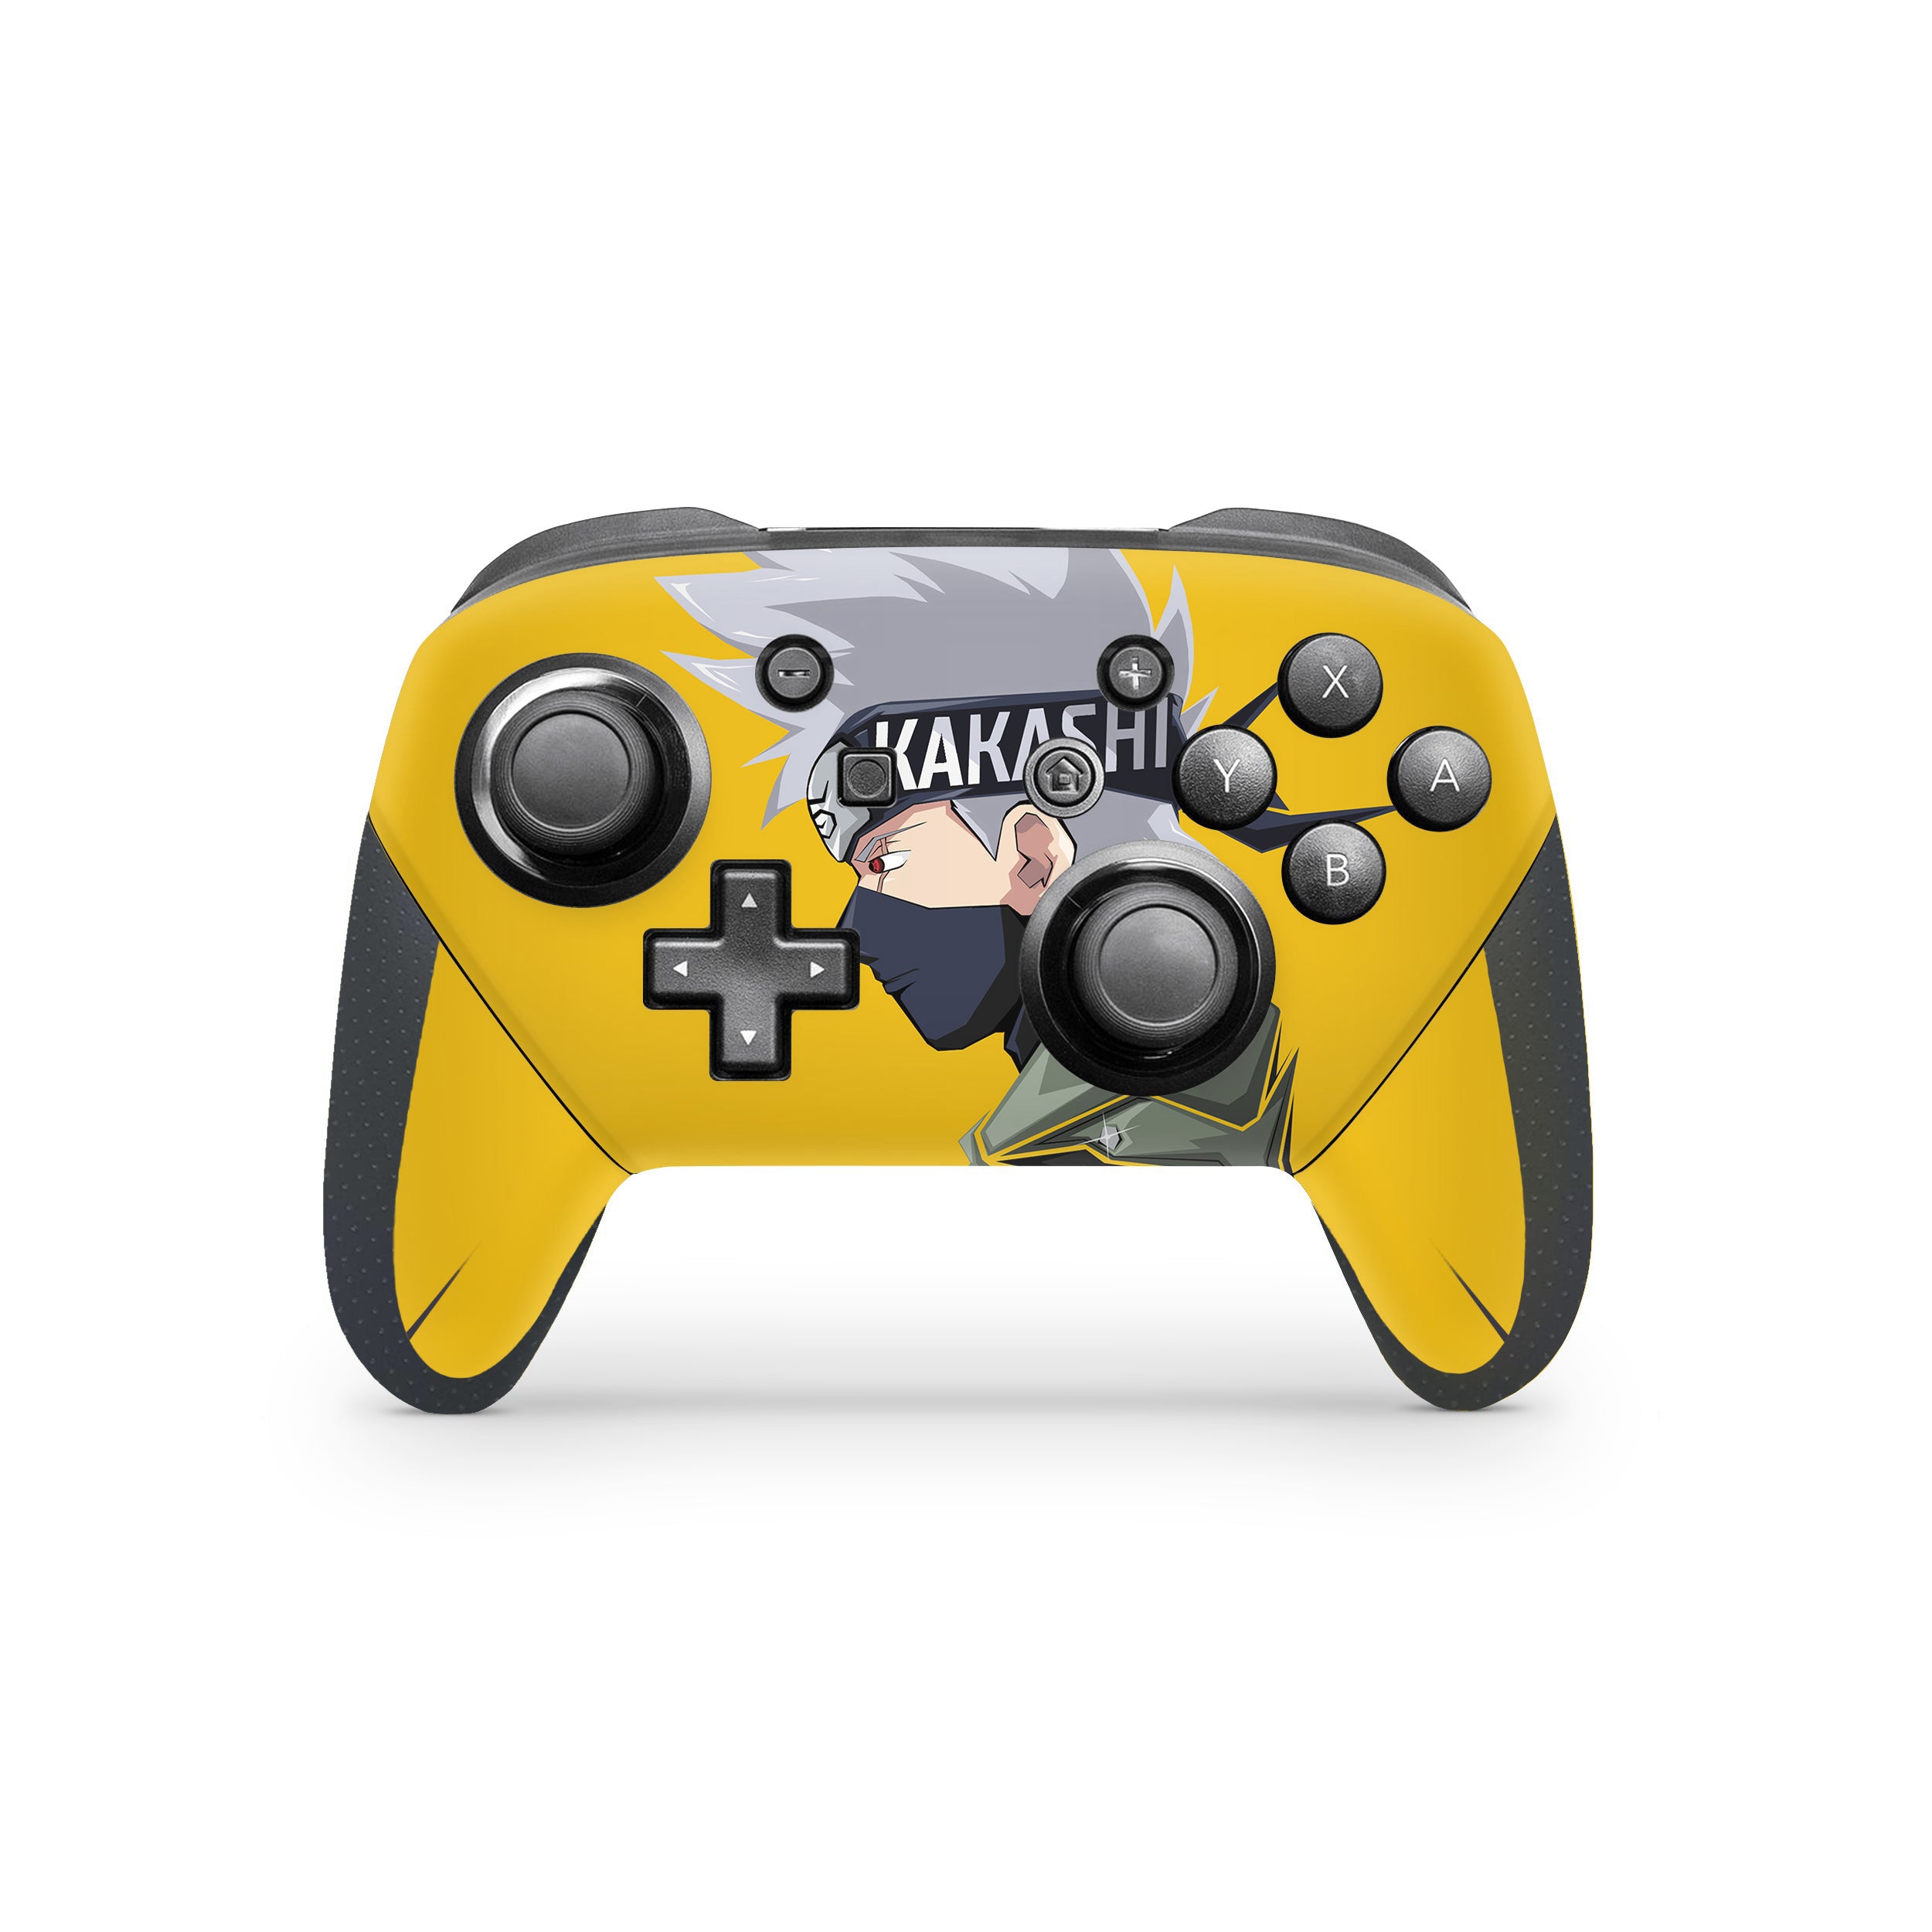 A video game skin featuring a Naruto Kakashi design for the Switch Pro Controller.